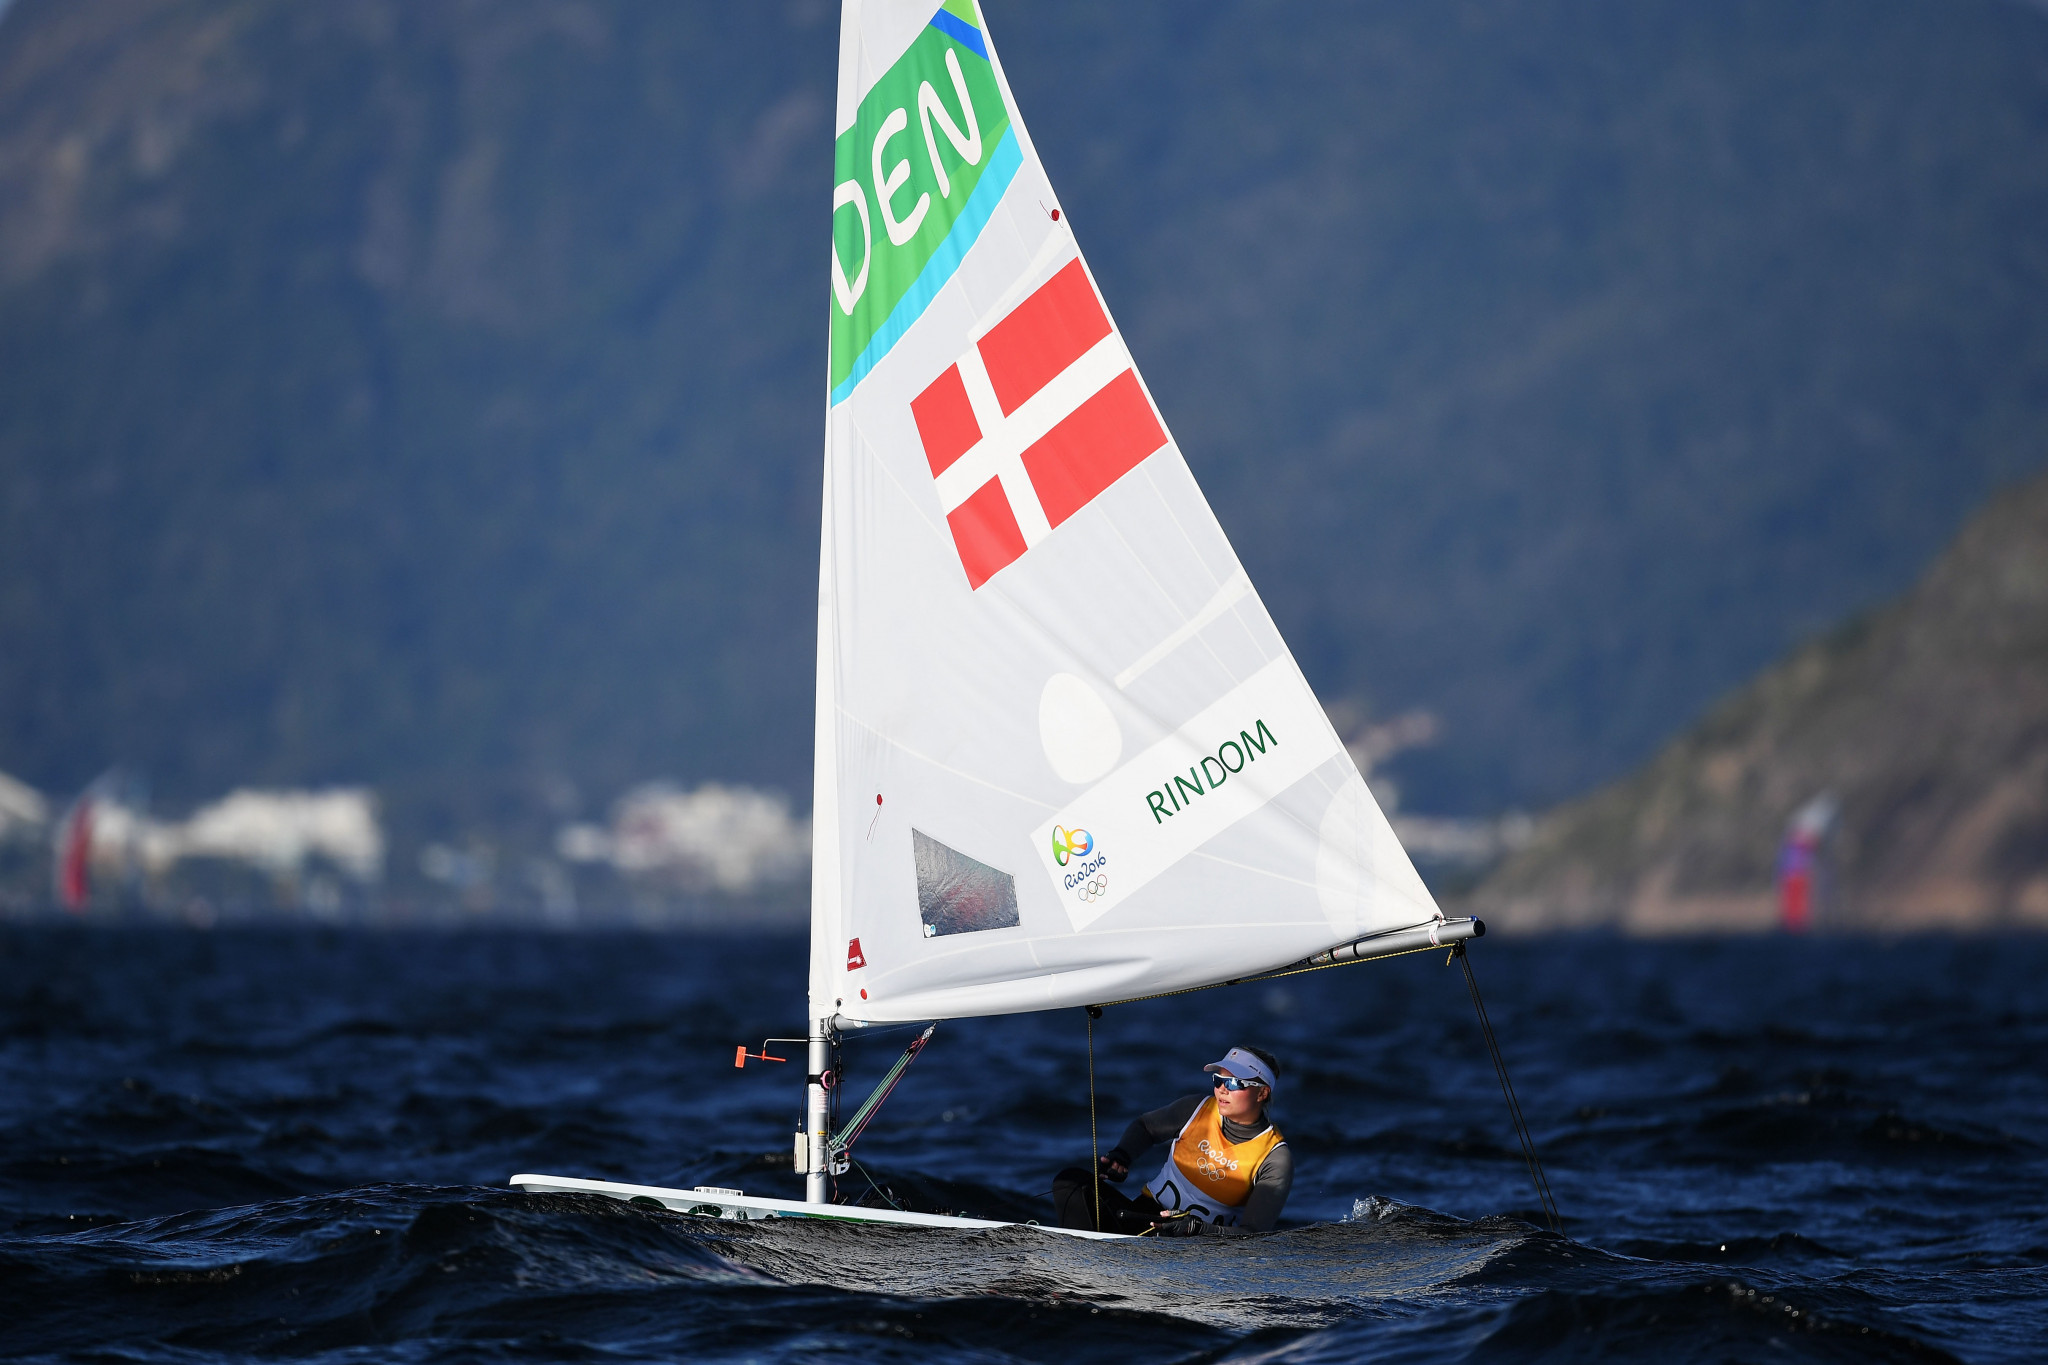 Anne-Marie Rindom will bid to defend her title at the Laser Senior European Championships ©Getty Images